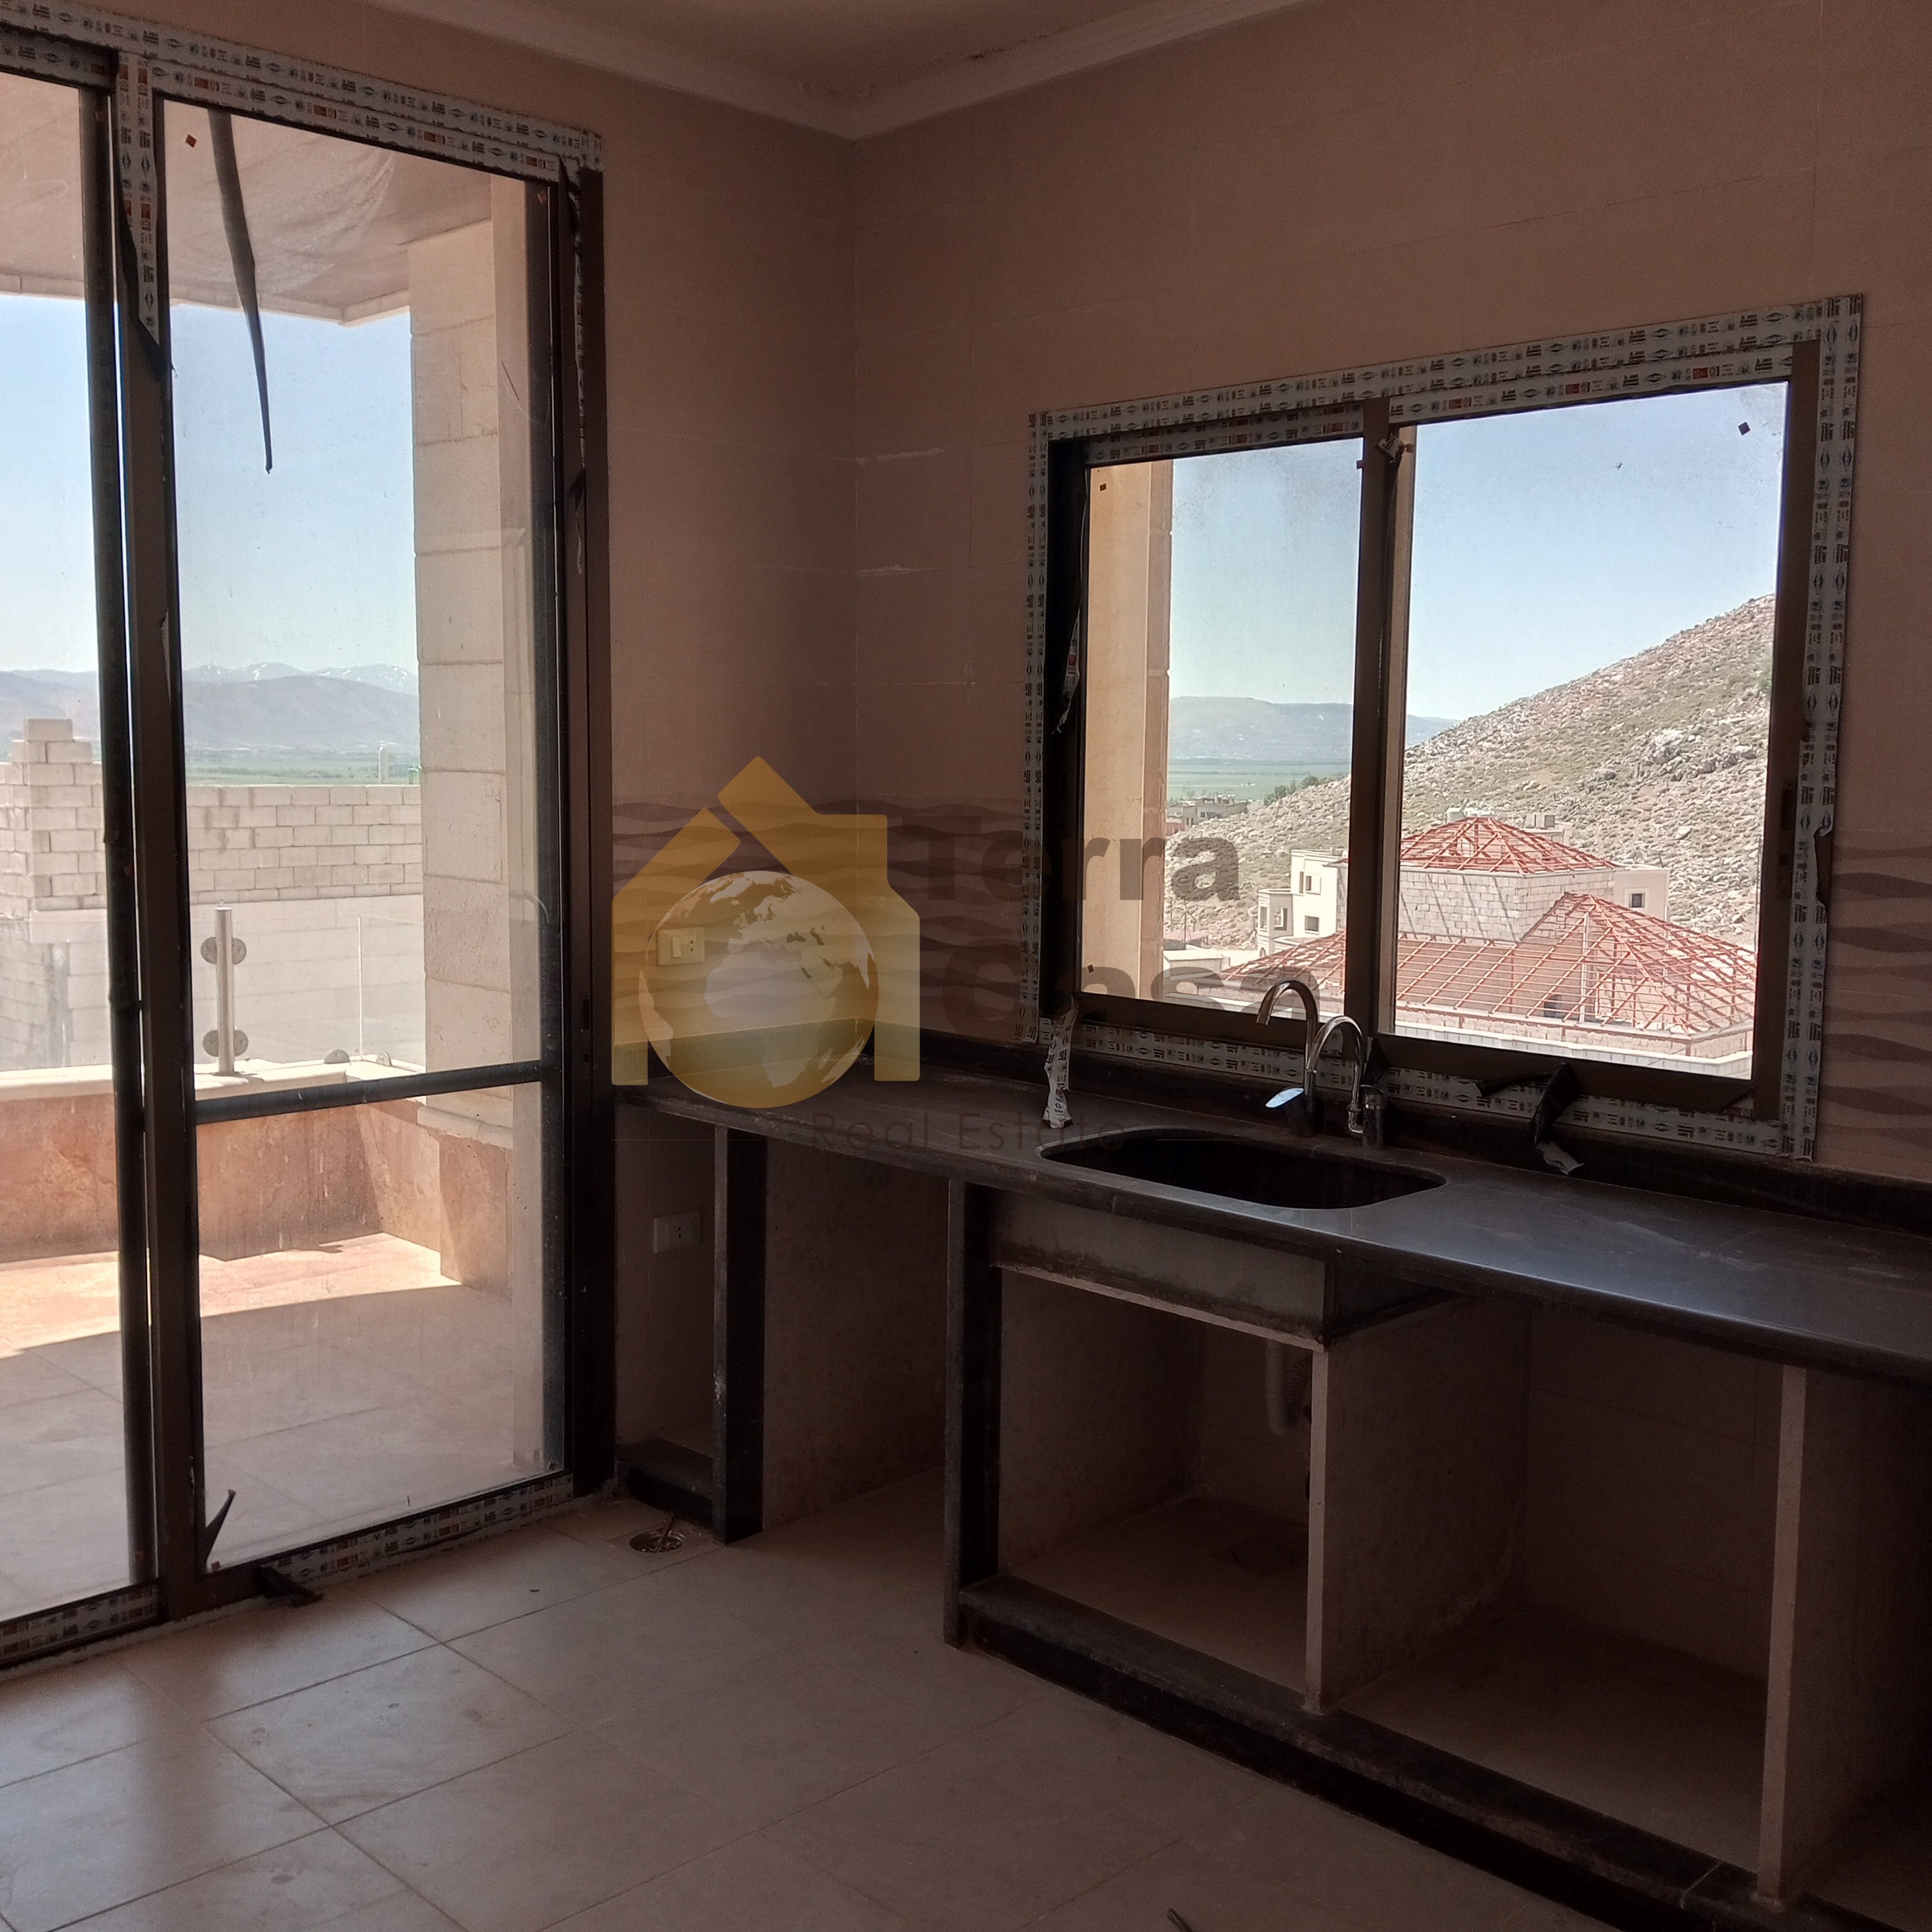 Apartment for sale in zahle qoub elias brand new. Ref#996